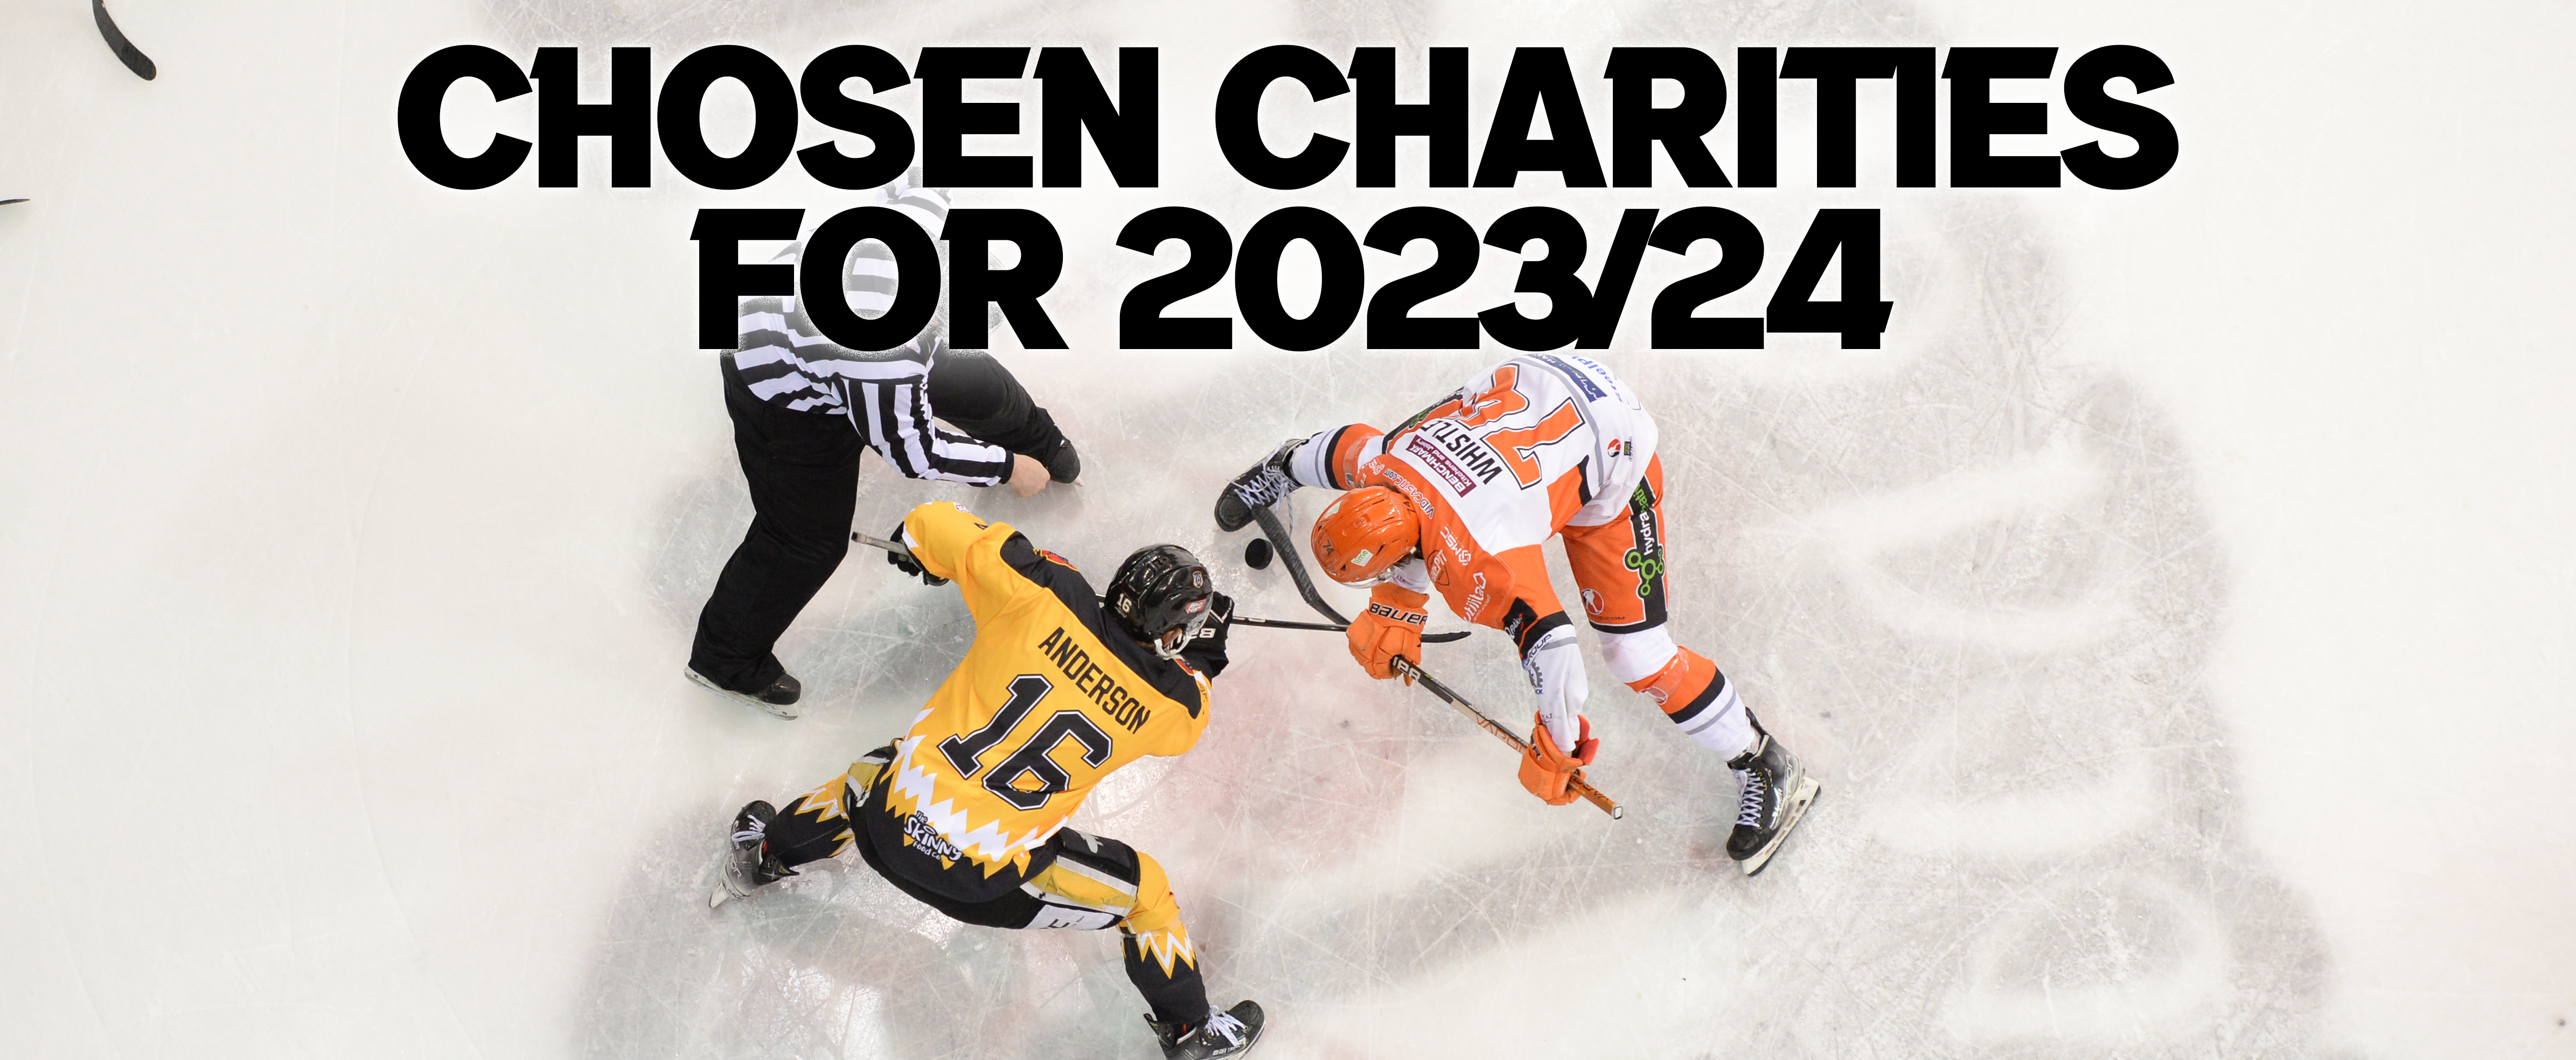 PANTHERS CHARITIES CONFIRMED FOR 2023-24 SEASON Top Image